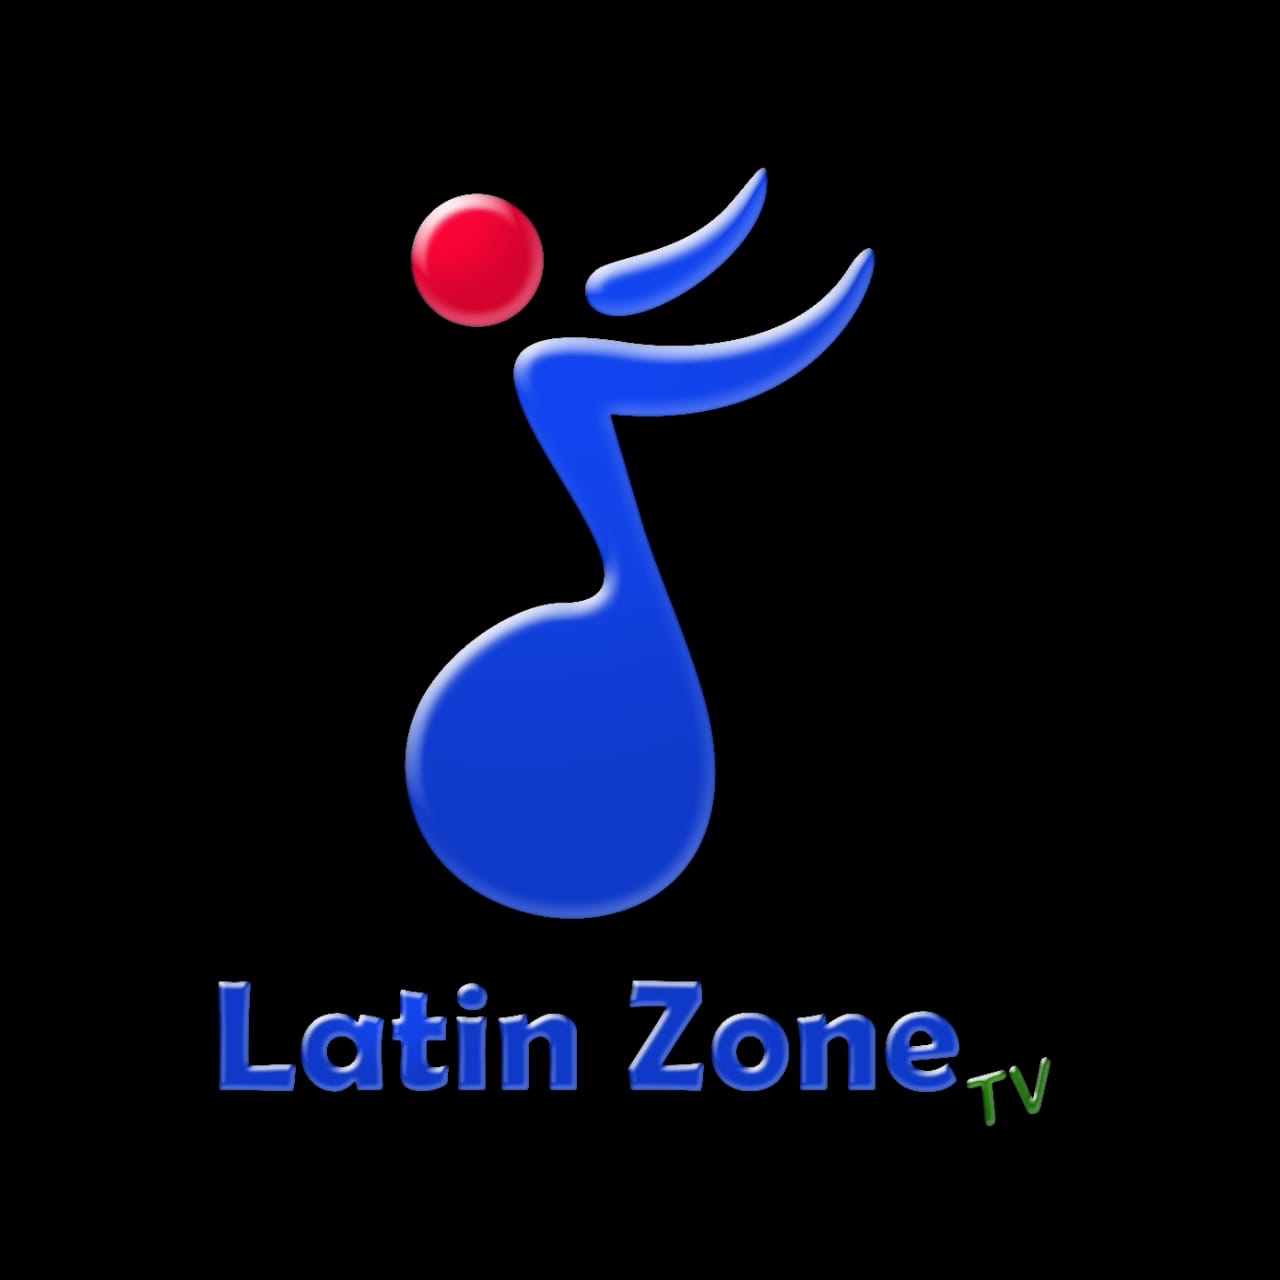 Canal Latin Zone TV